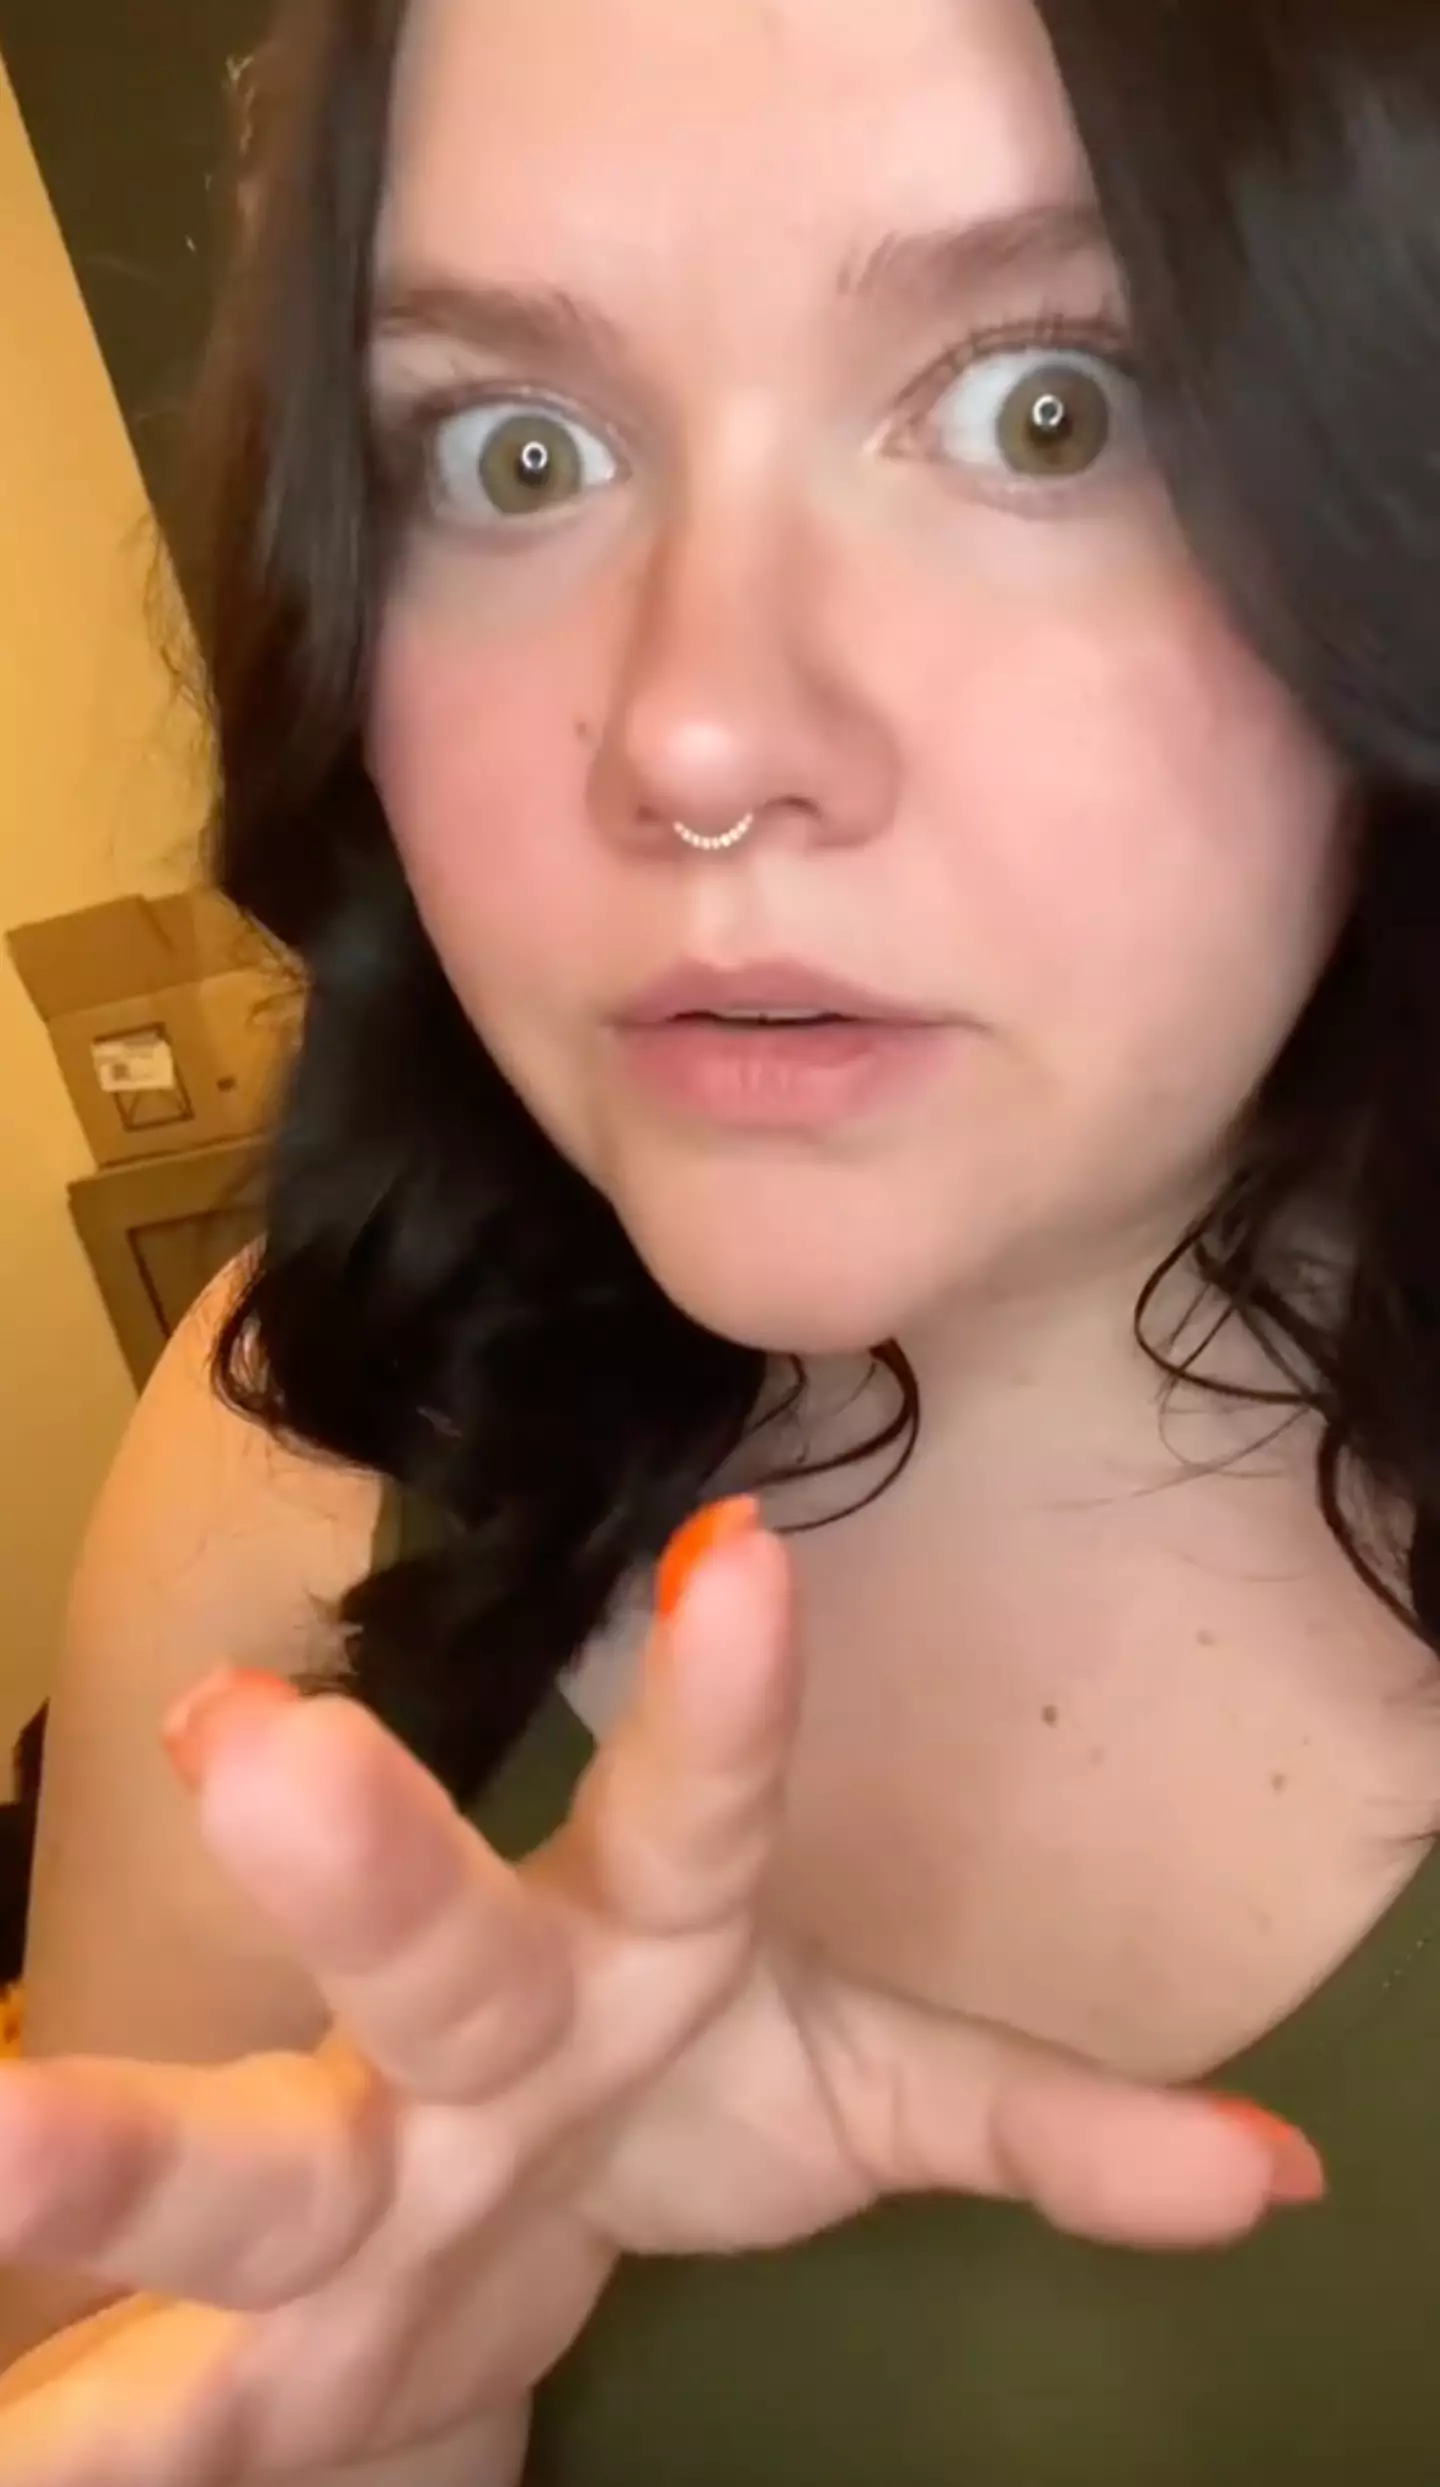 Katherine took to TikTok to share a series of explanations about the ordeal.